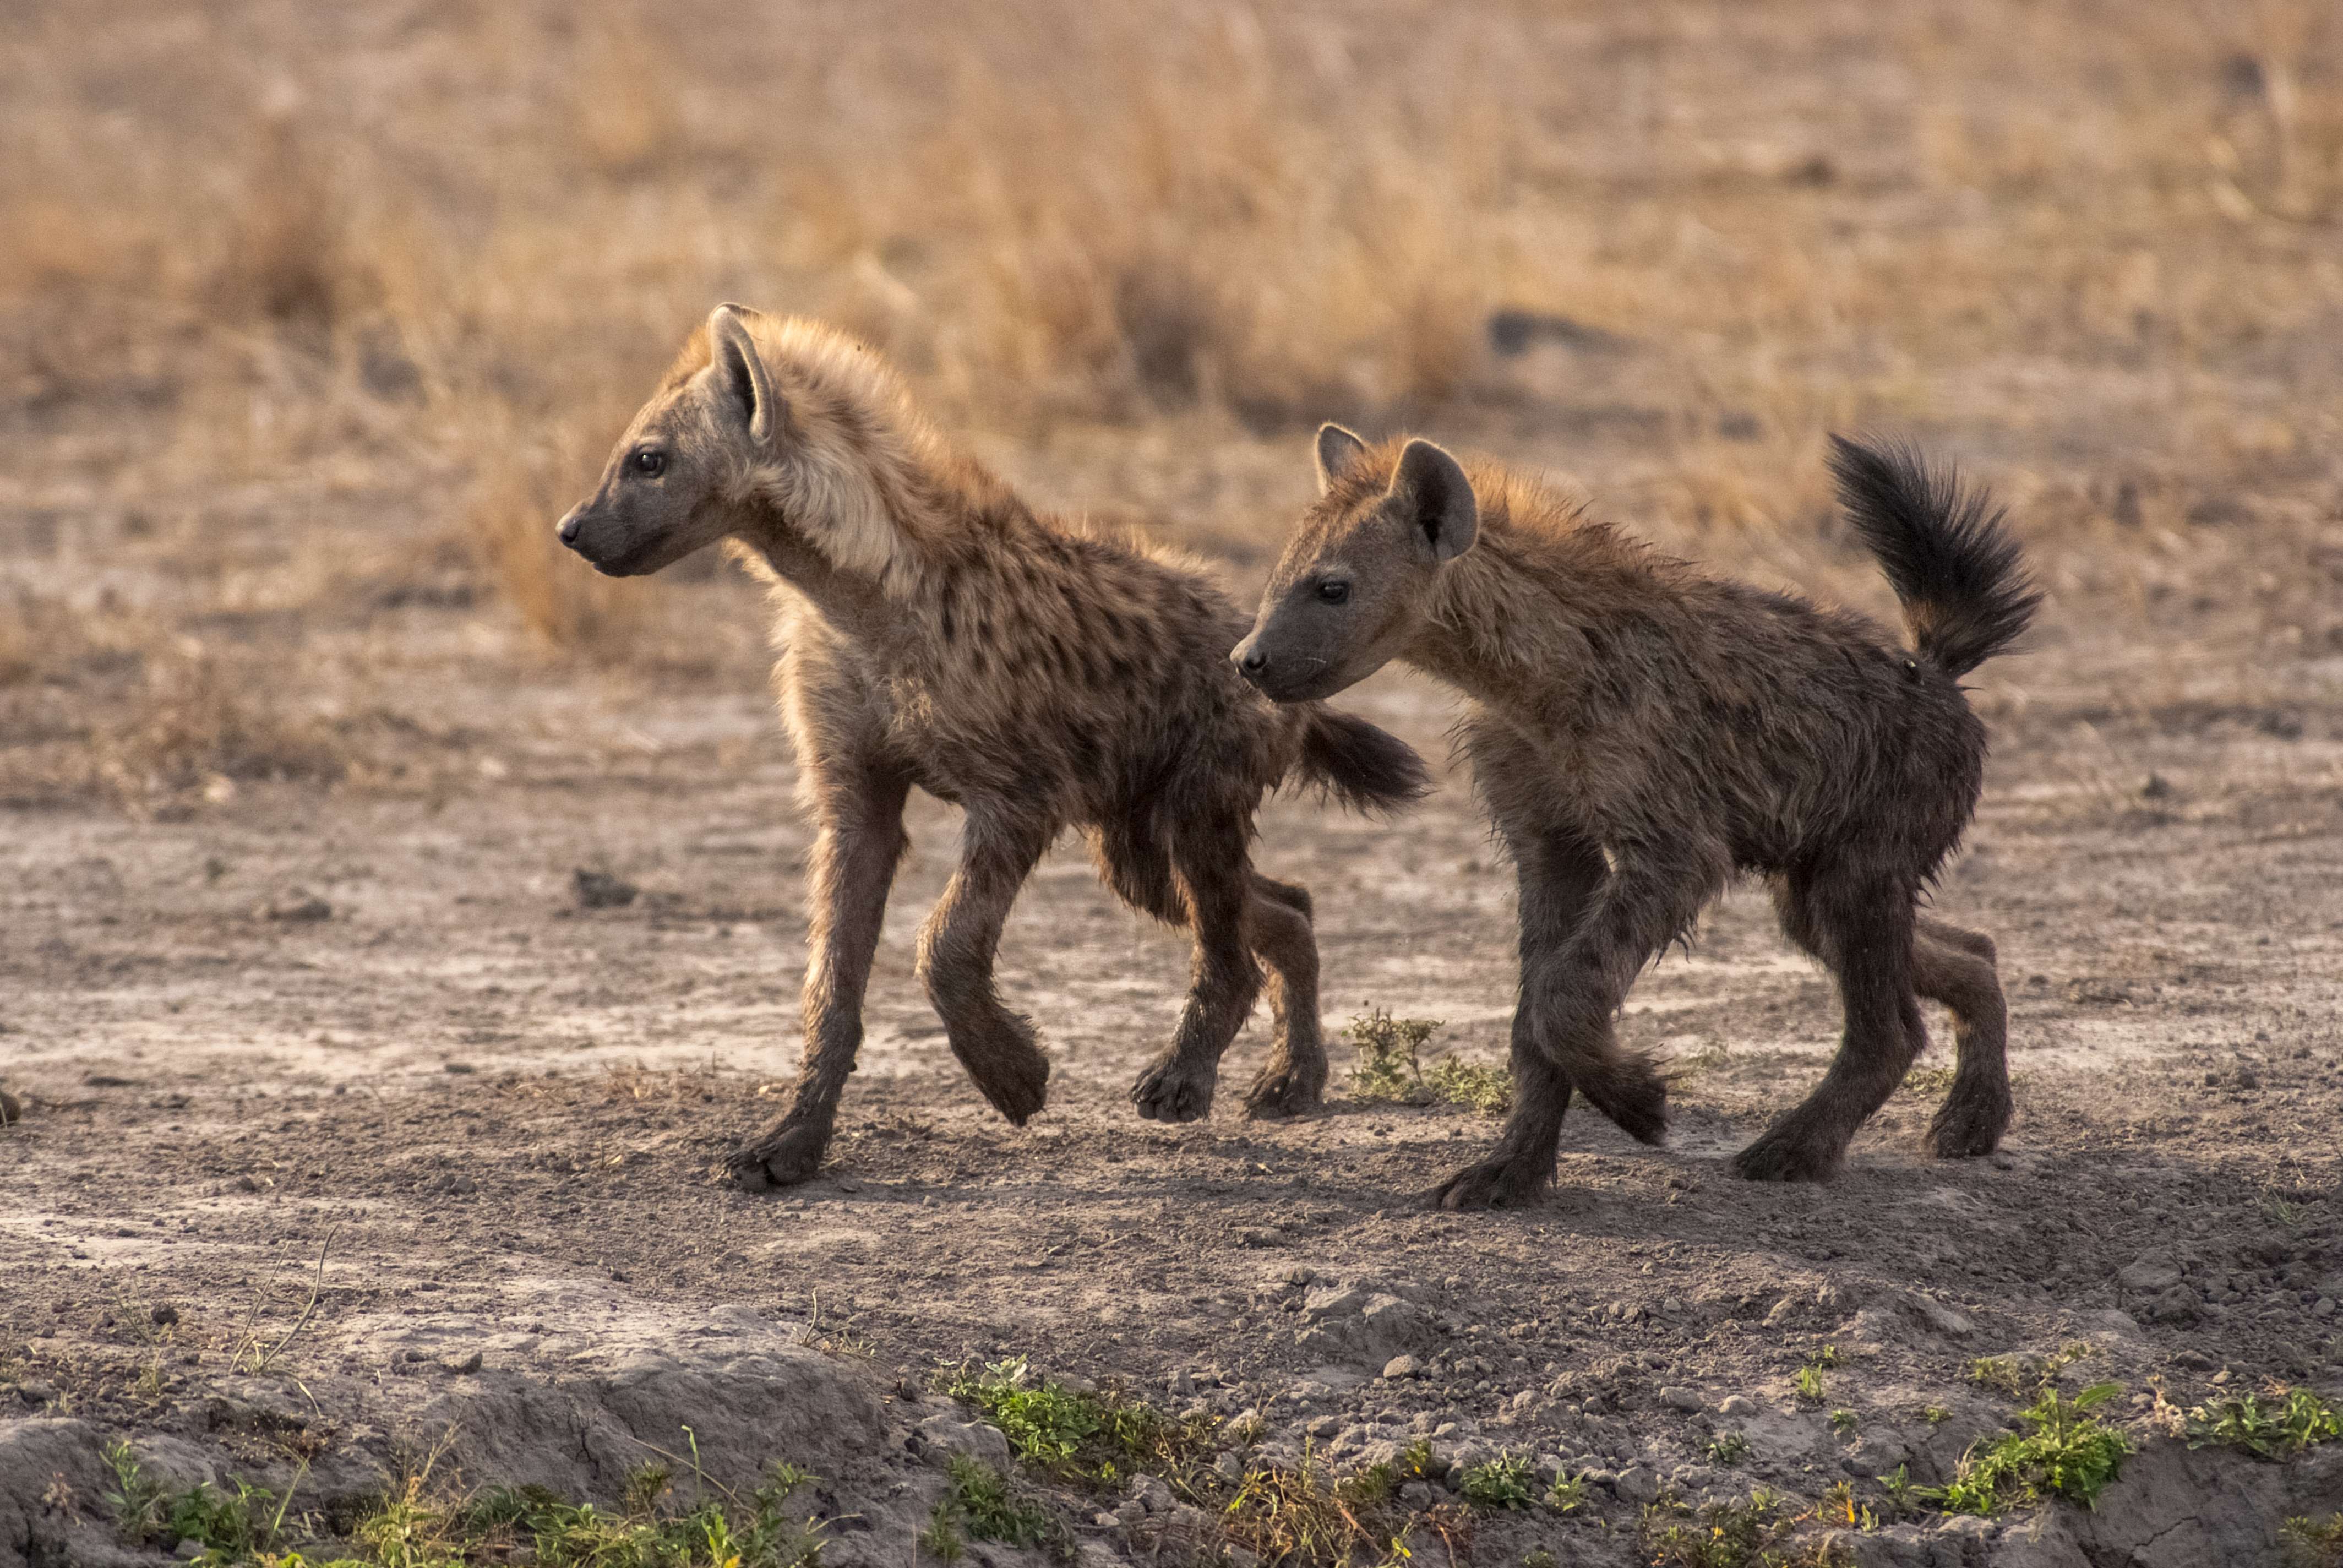 Two juvenile spotted hyenas make their way to a mud hole in the Okavango delta. © WWF-US/Rachel Kramer